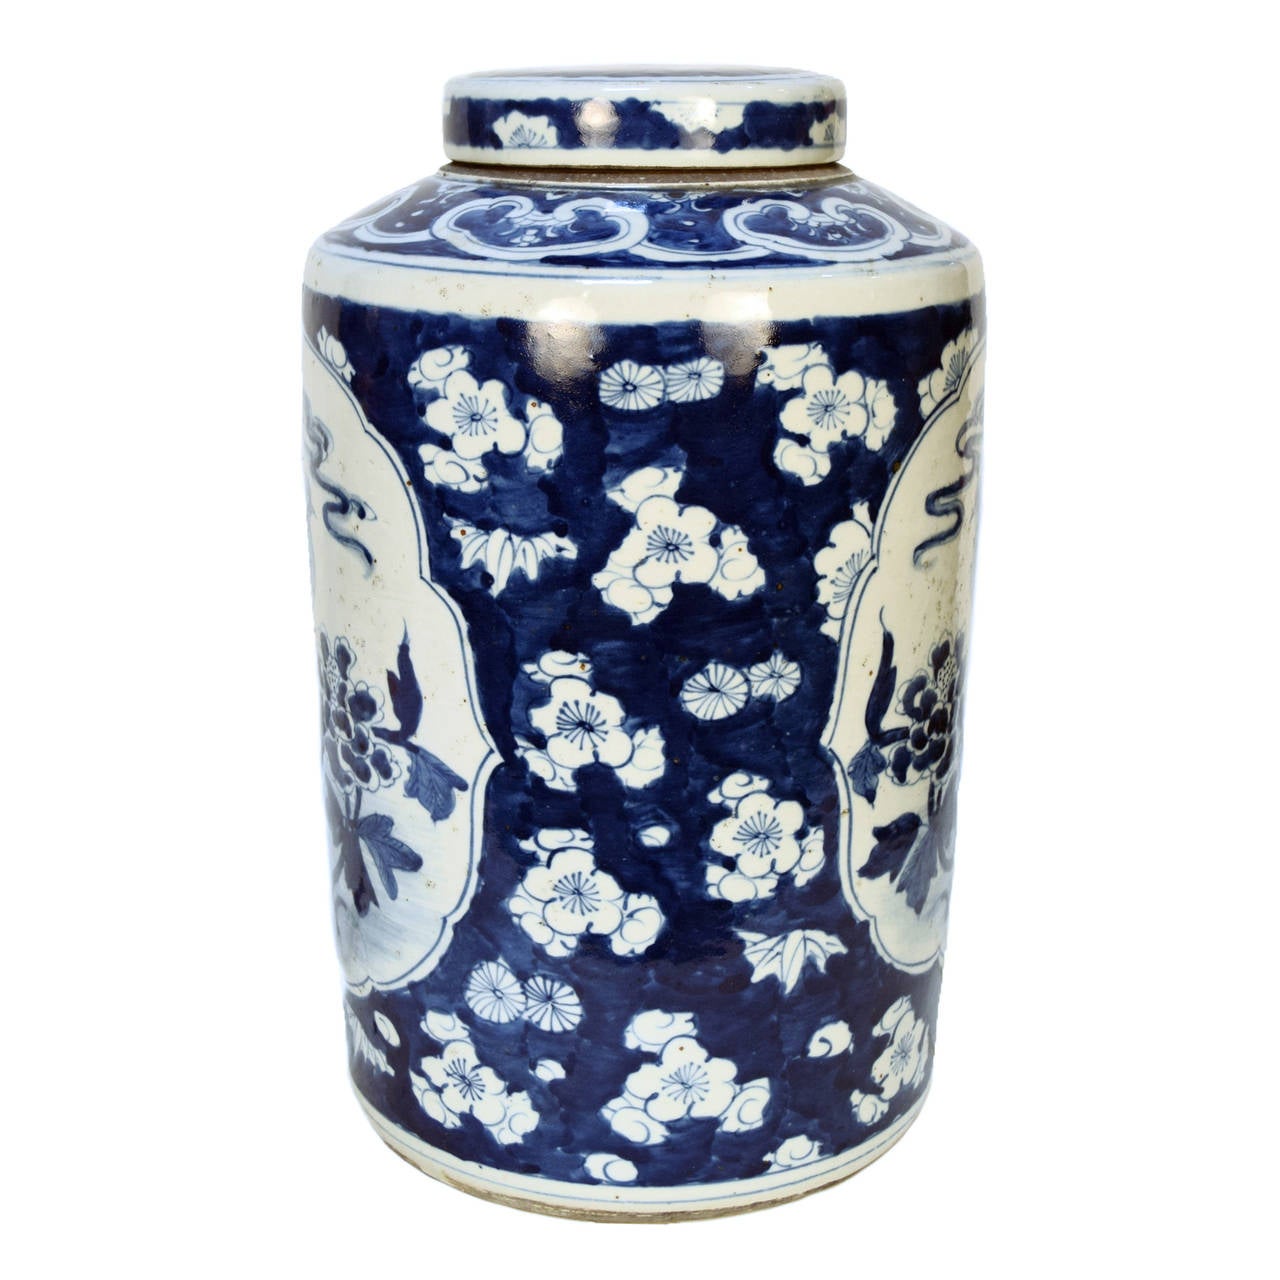 A blue and white tea leaf jar with lid featuring a Phoenix motif from Beijing, China.